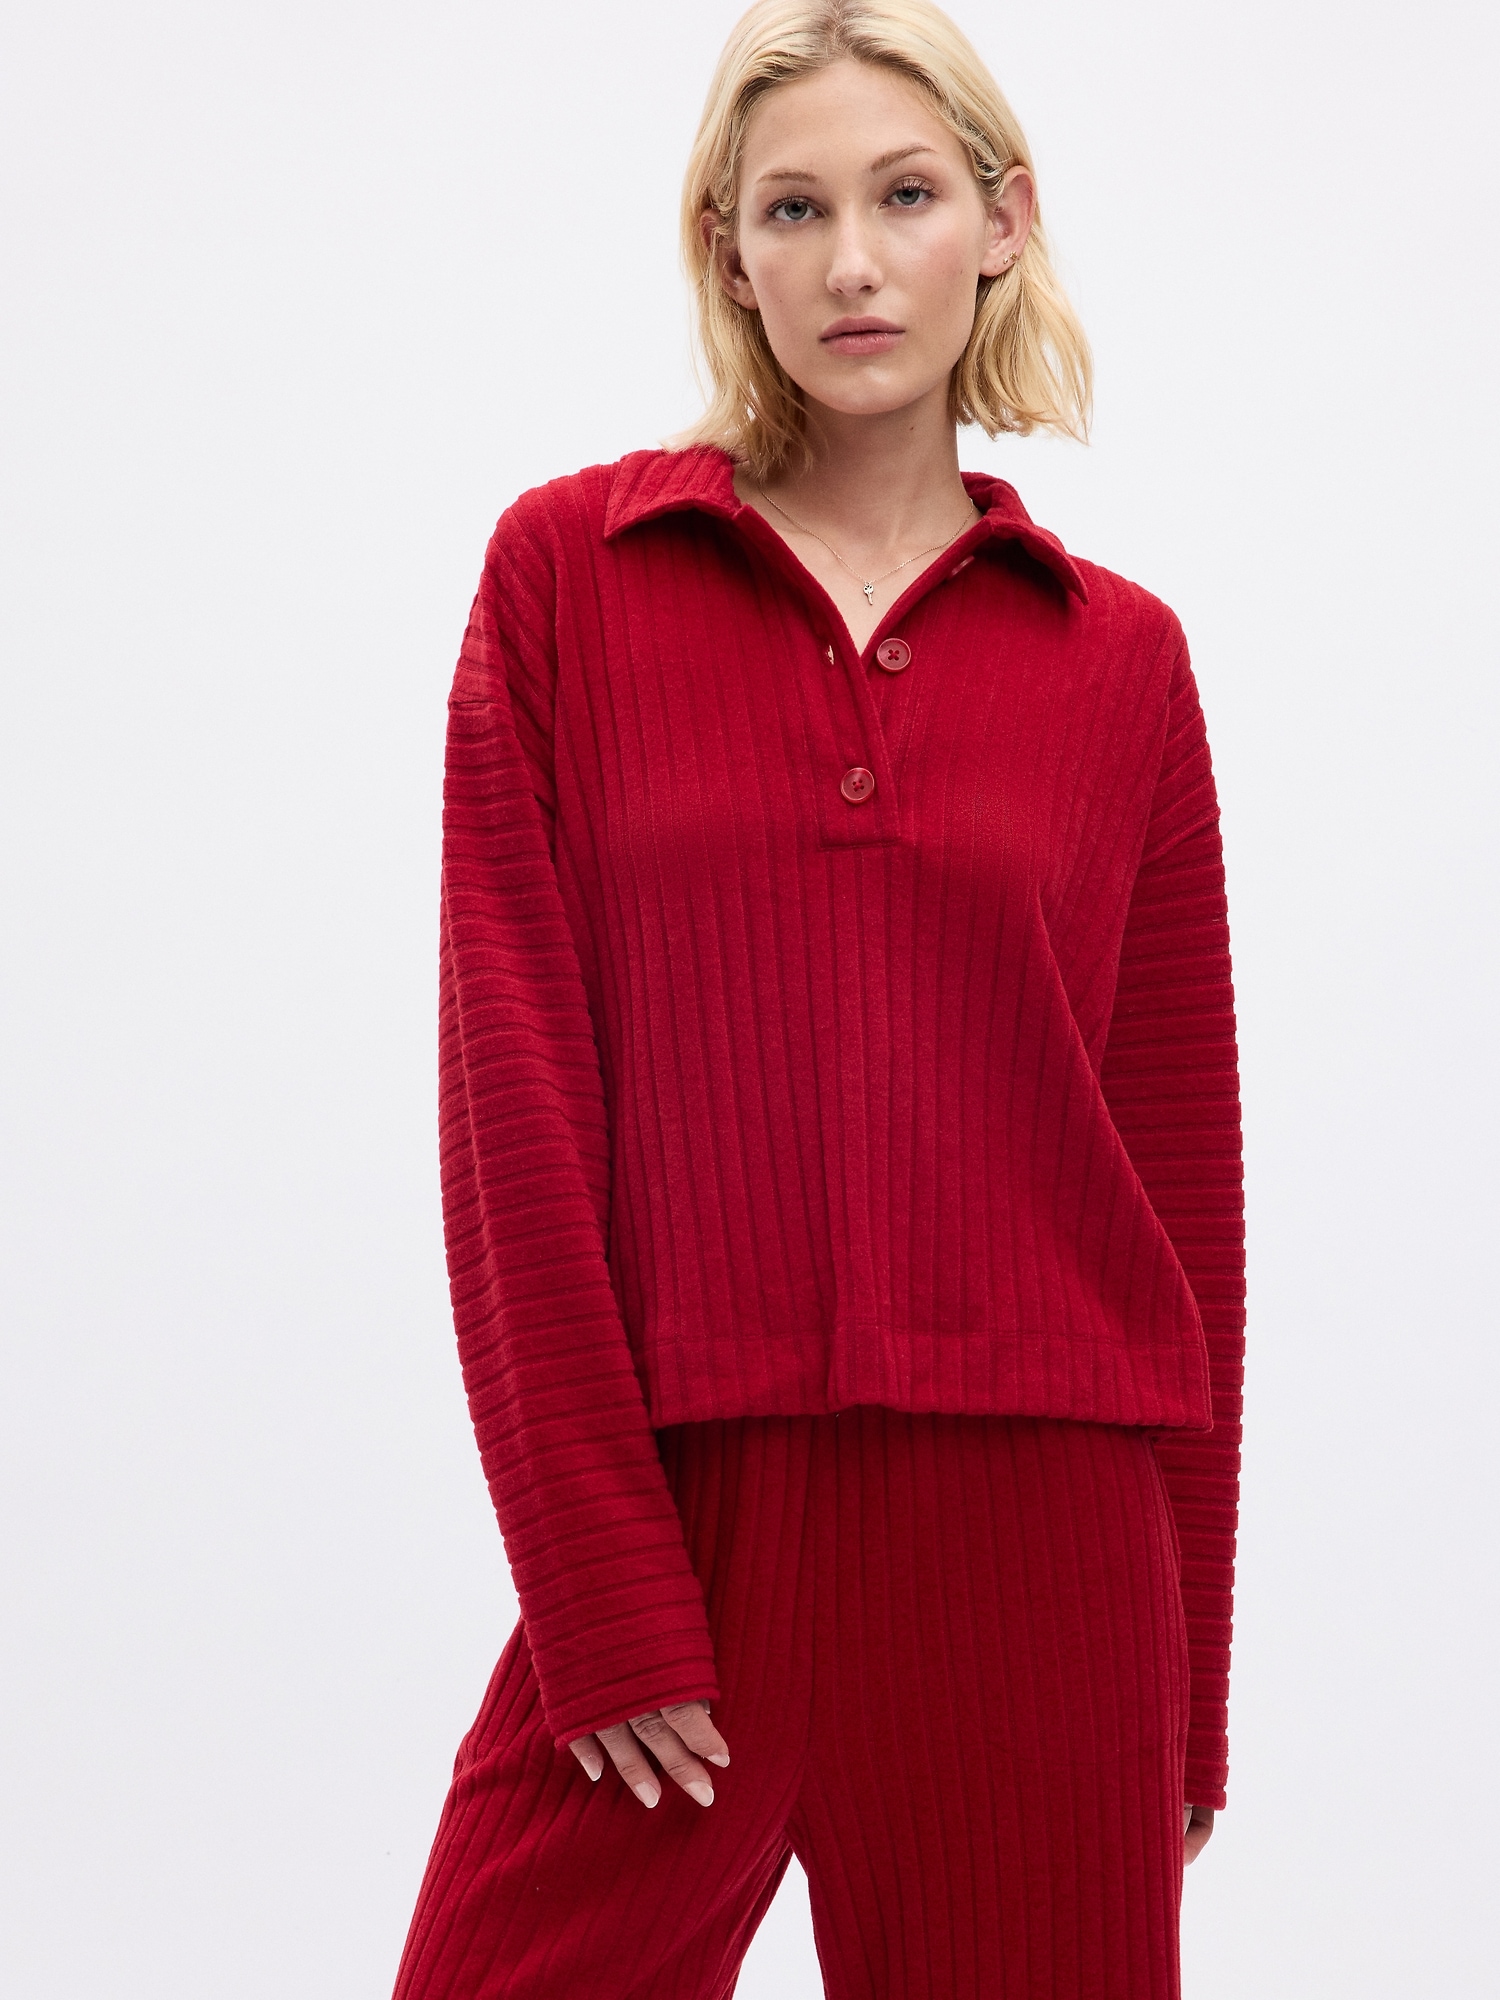 Gap Henley Pj Sweater In Sled Red